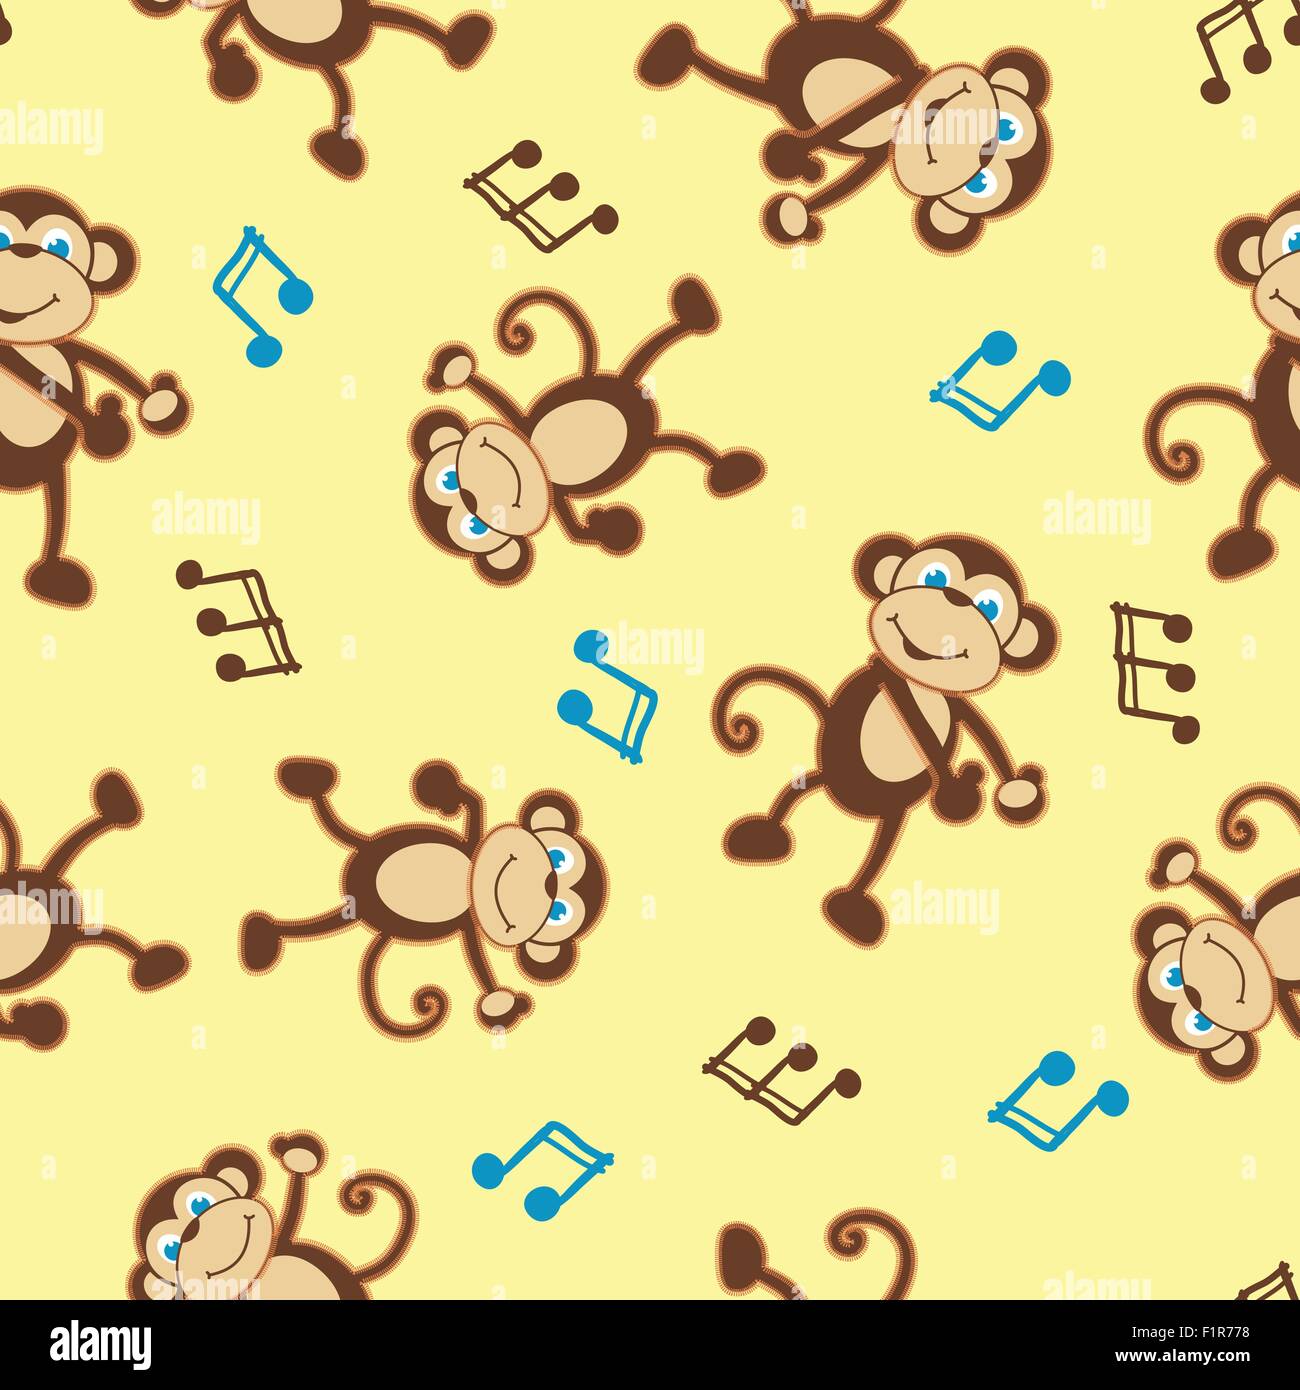 Dancing Monkey High Resolution Stock Photography And Images Alamy